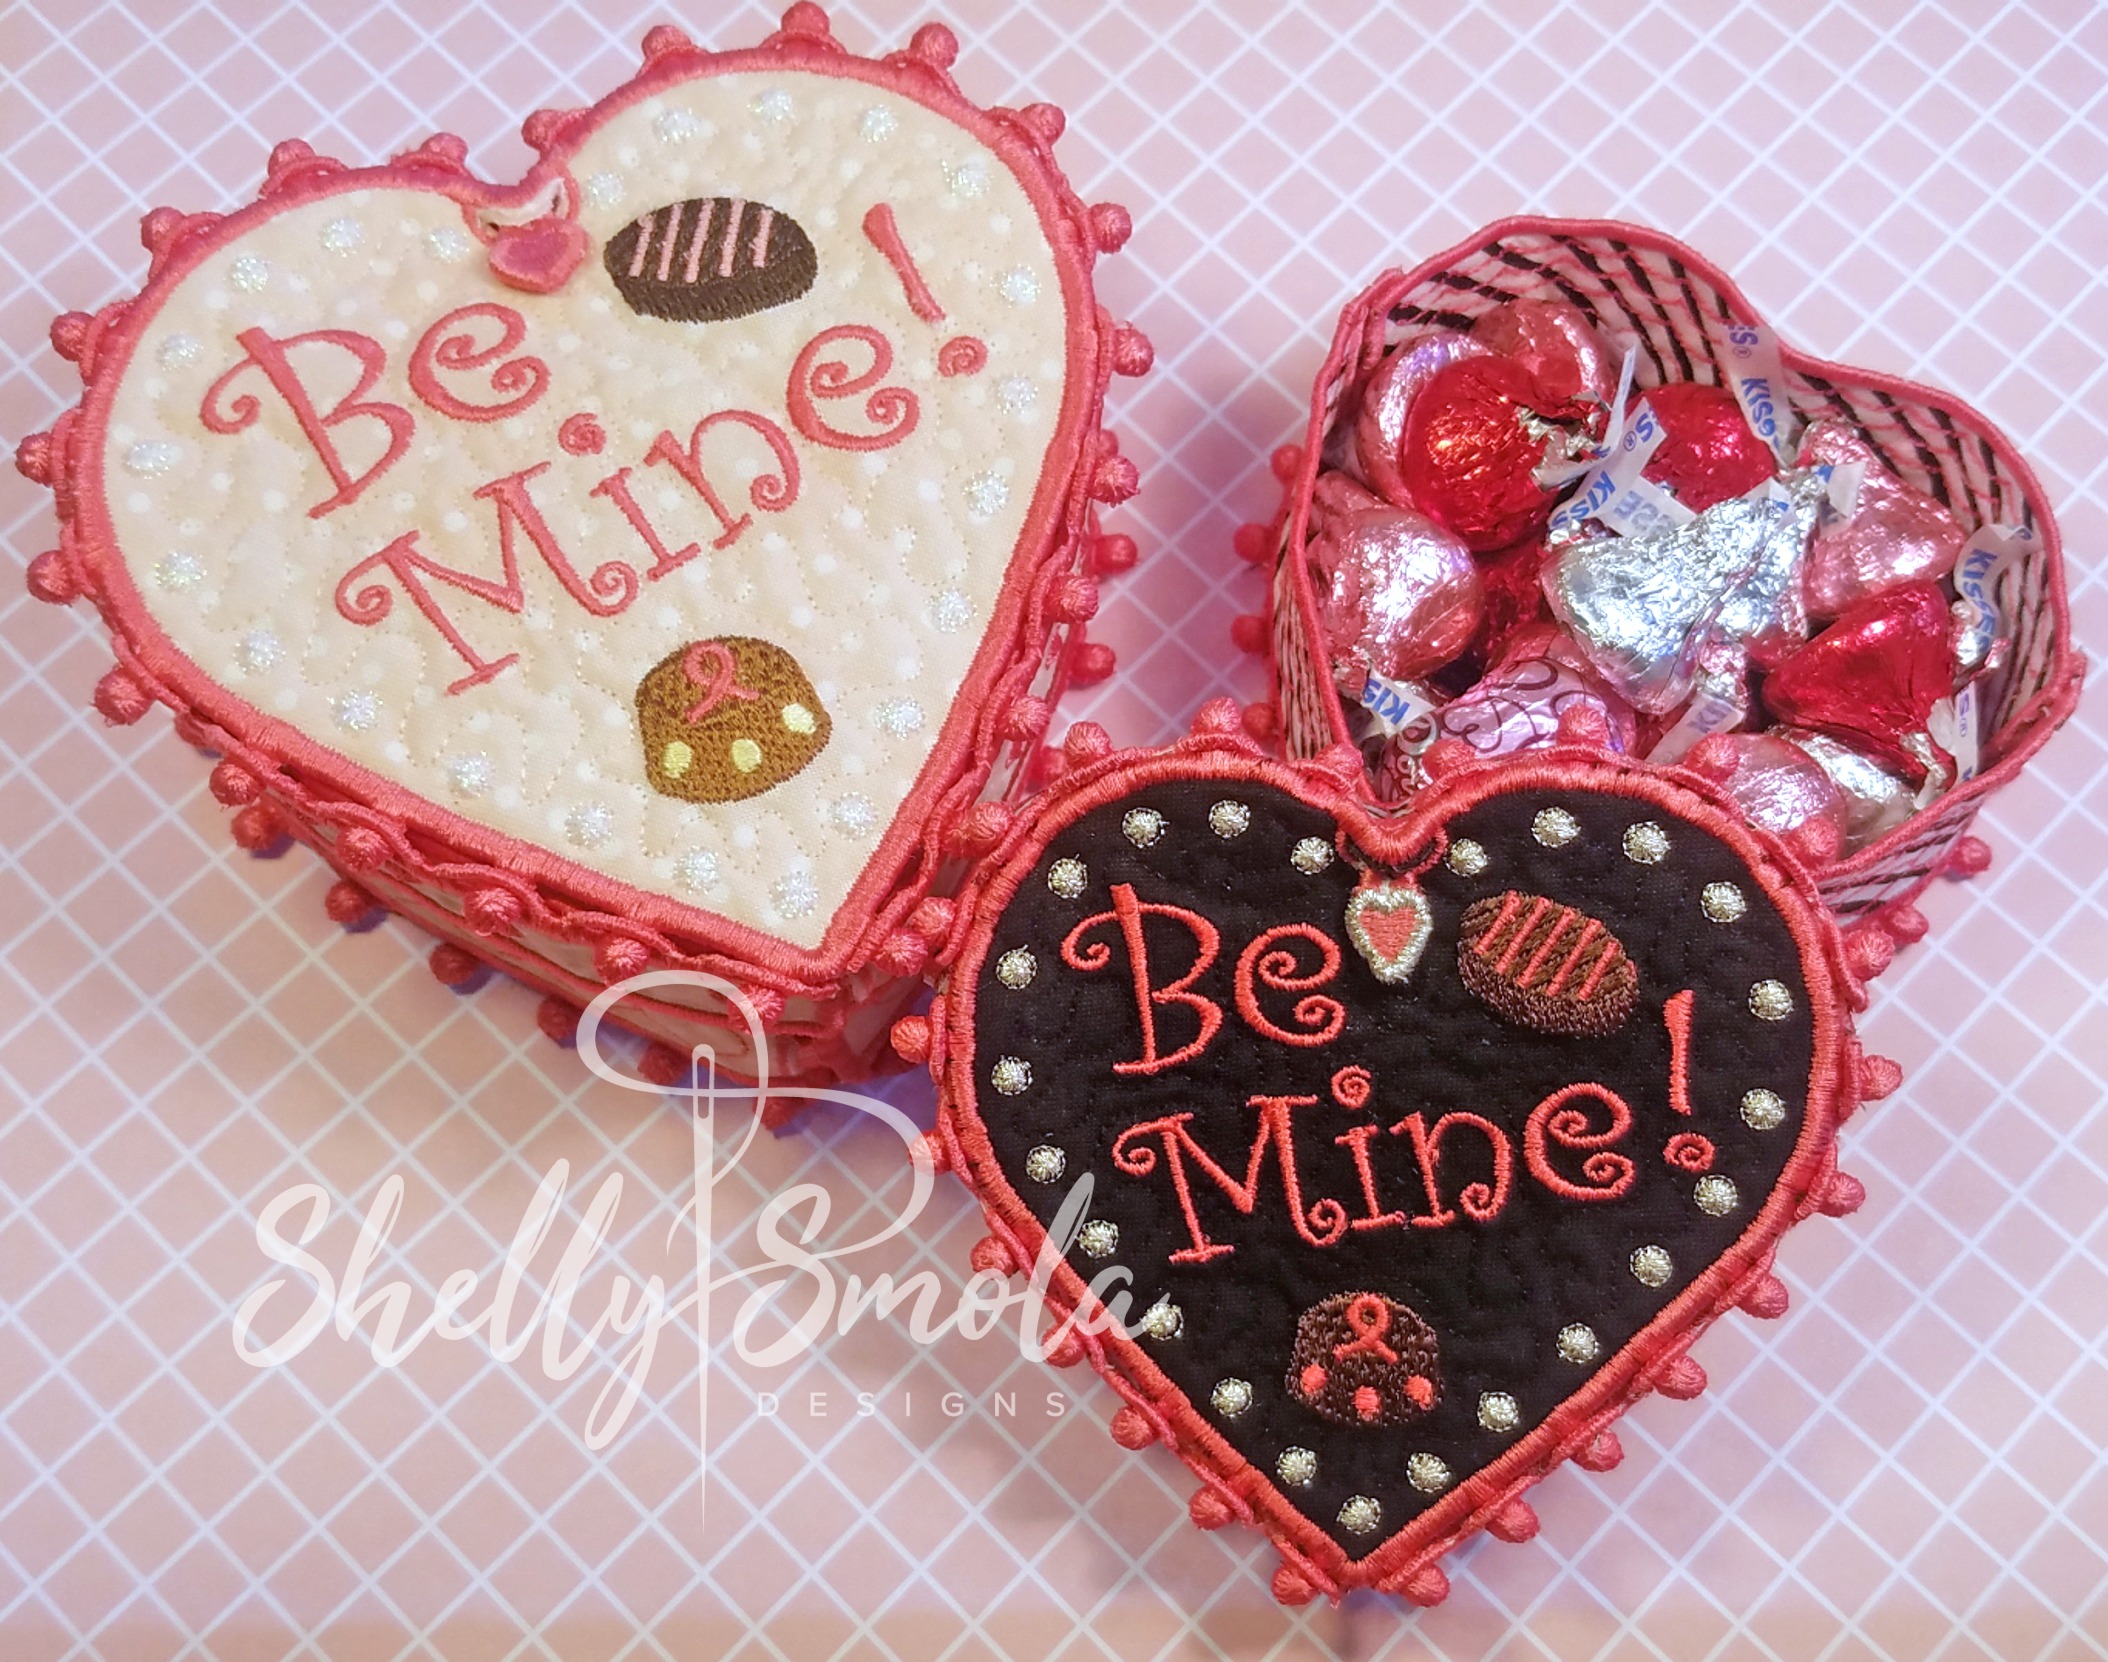 Sweet Treat Boxes by Shelly Smola